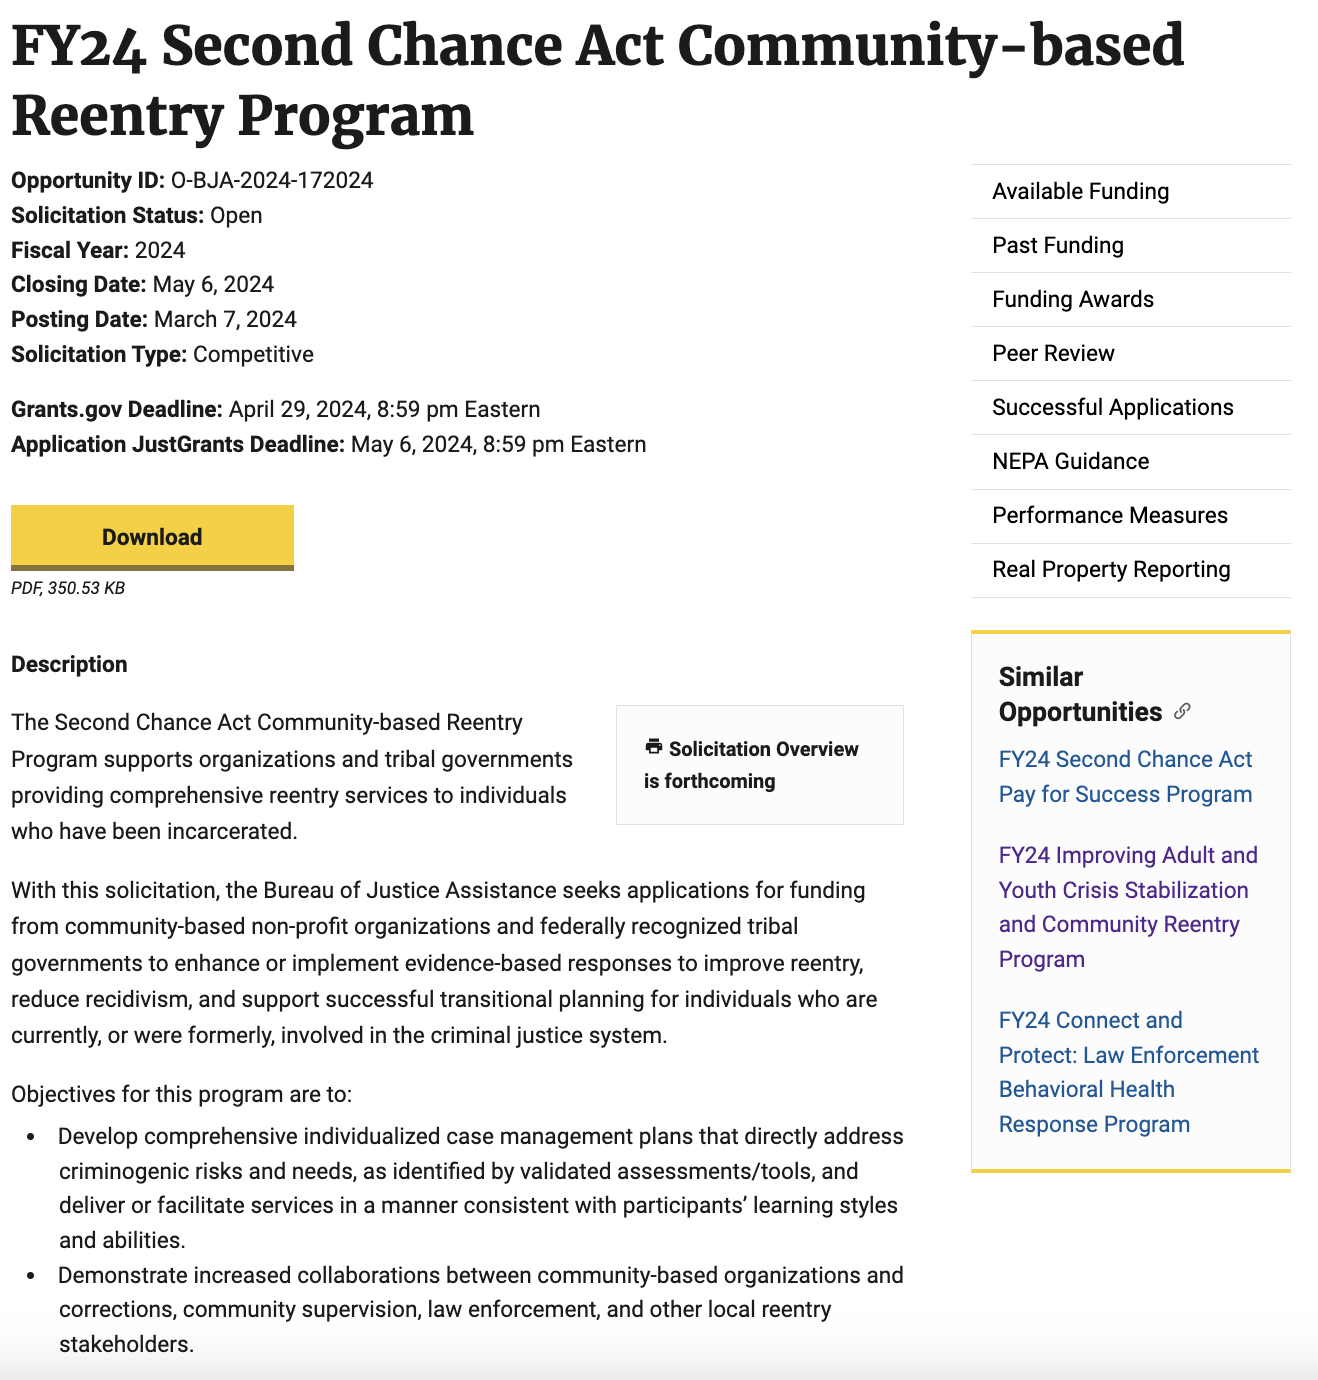 FY24 Second Chance Act Community-based Reentry Program